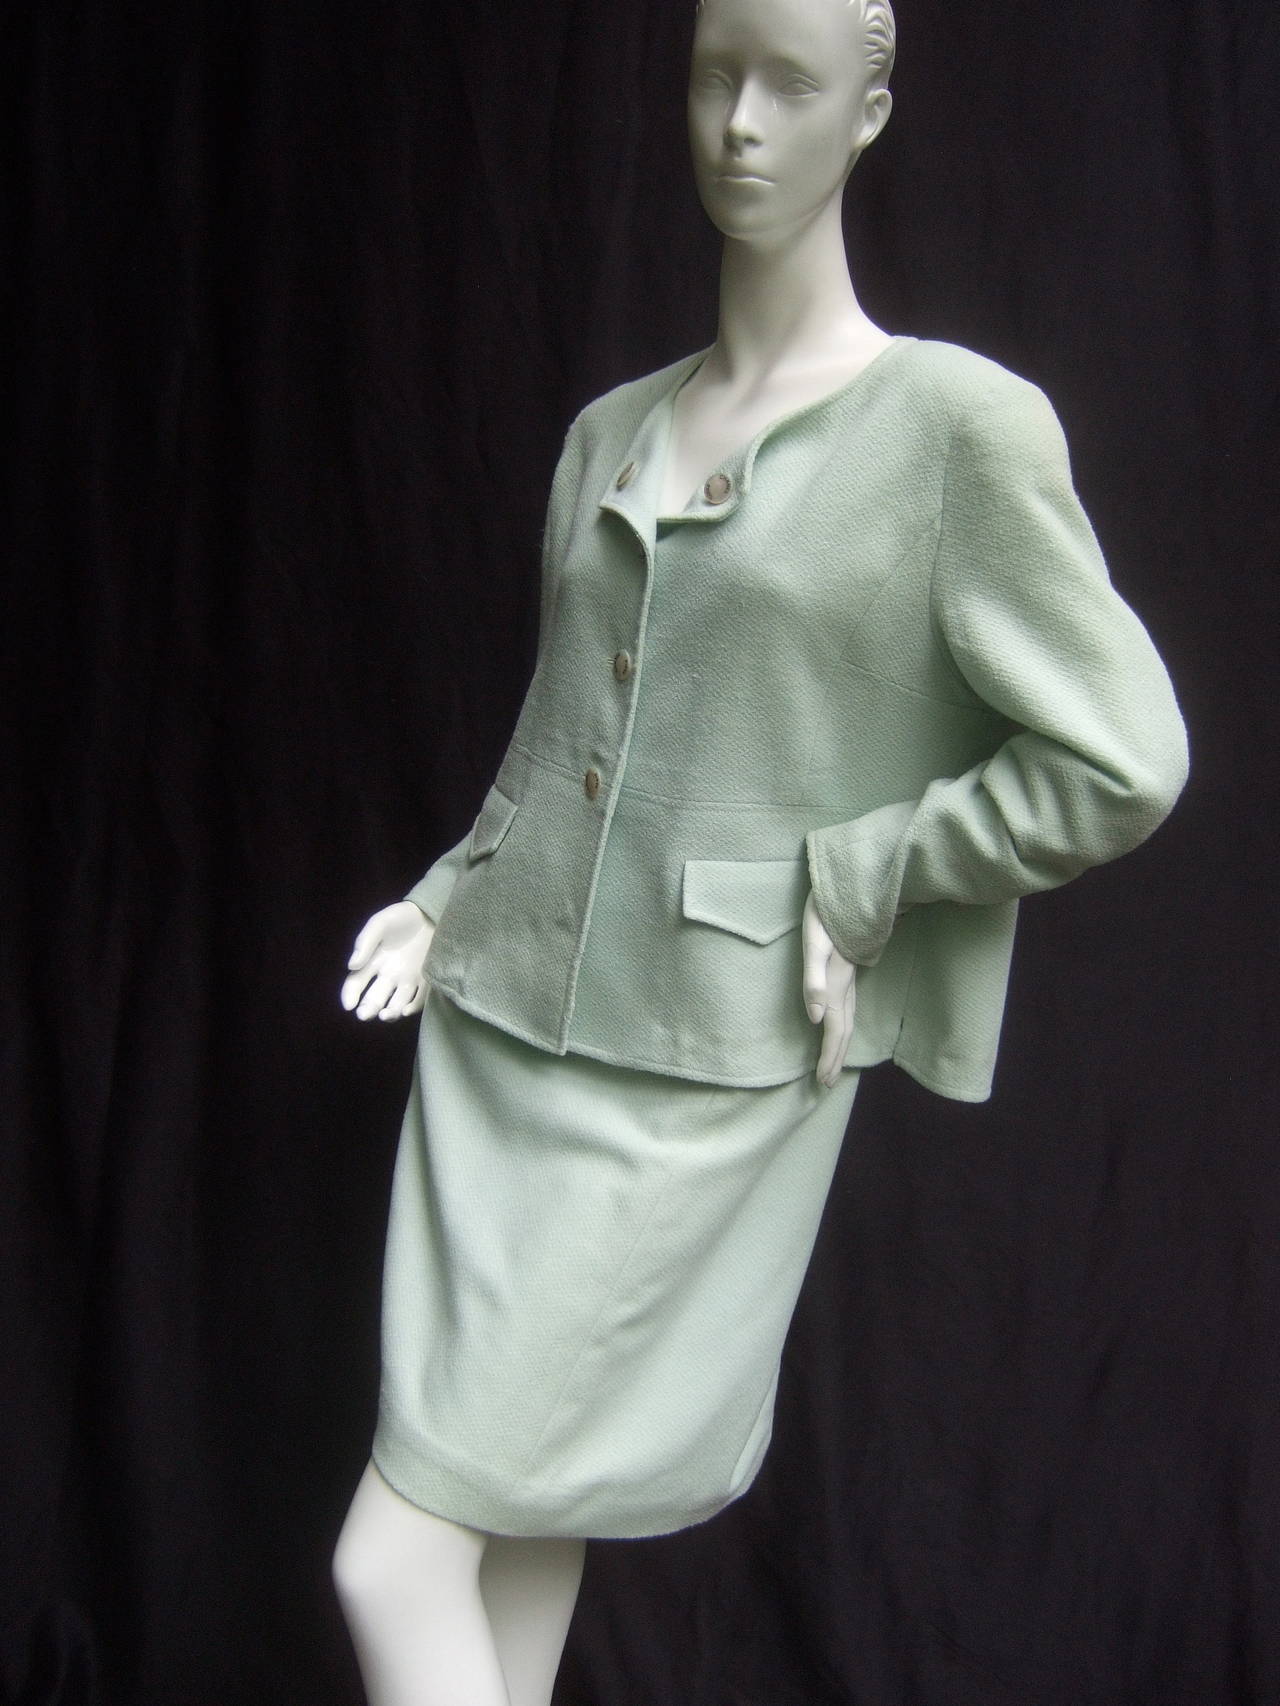 Chanel Boutique Chic mint green wool skirt suit c 1990
The classic pale green skirt suit is adorned with five
mother of pearl buttons on the front of the jacket
Each button is stamped Chanel Paris 

Each sleeve is designed with three matching